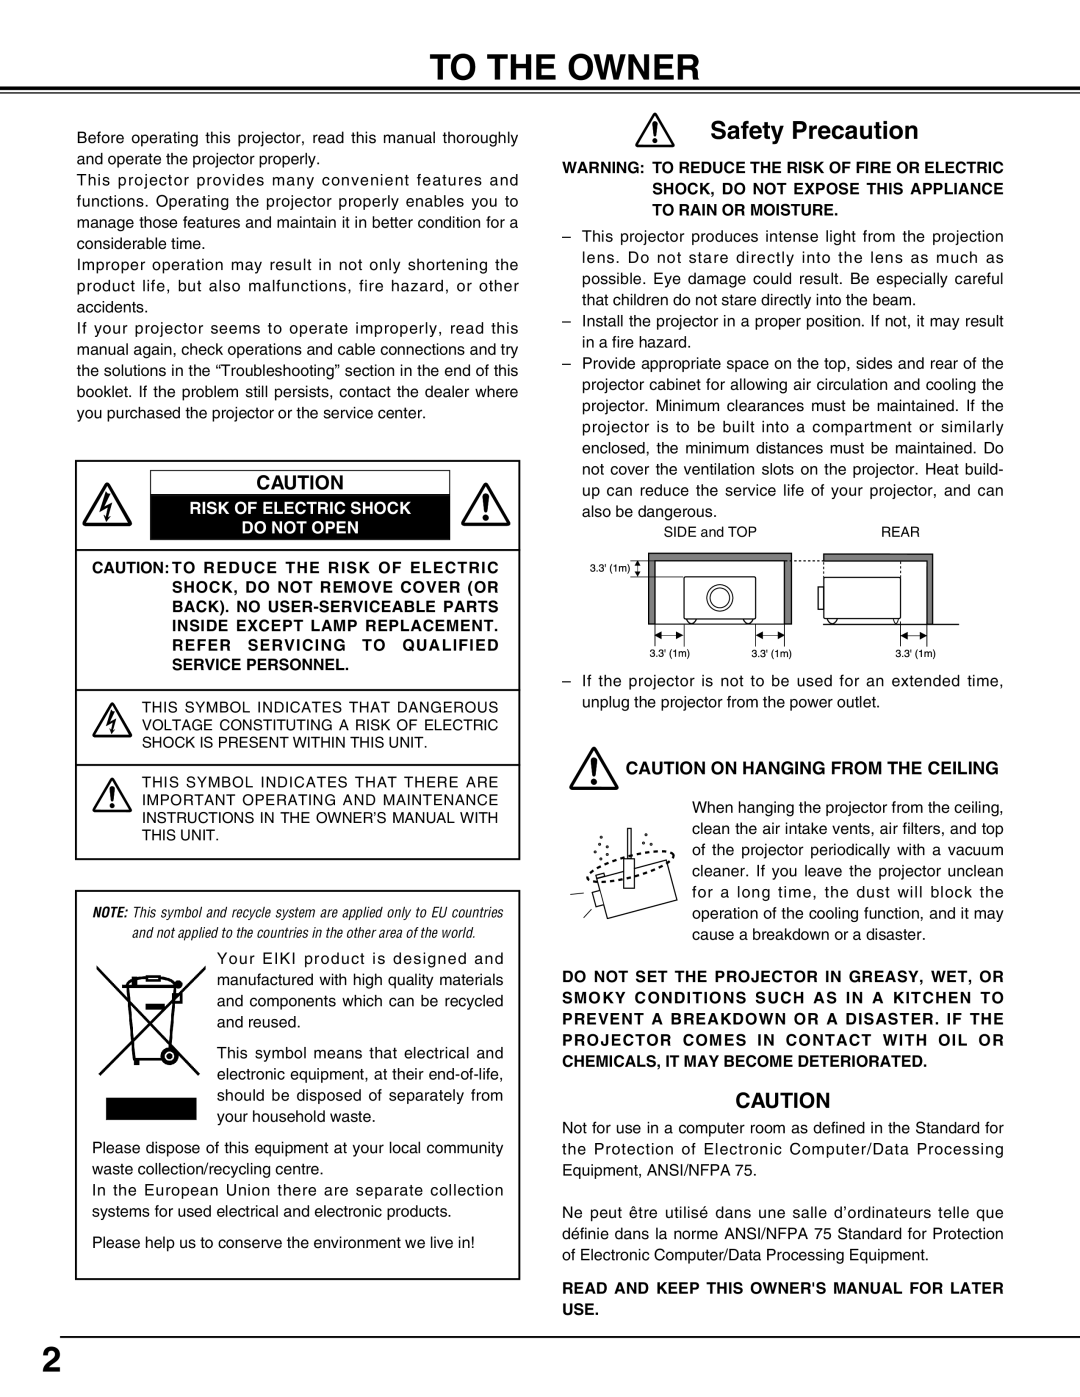 Eiki LC-X71L owner manual To The Owner, Safety Precaution, Risk Of Electric Shock Do Not Open 